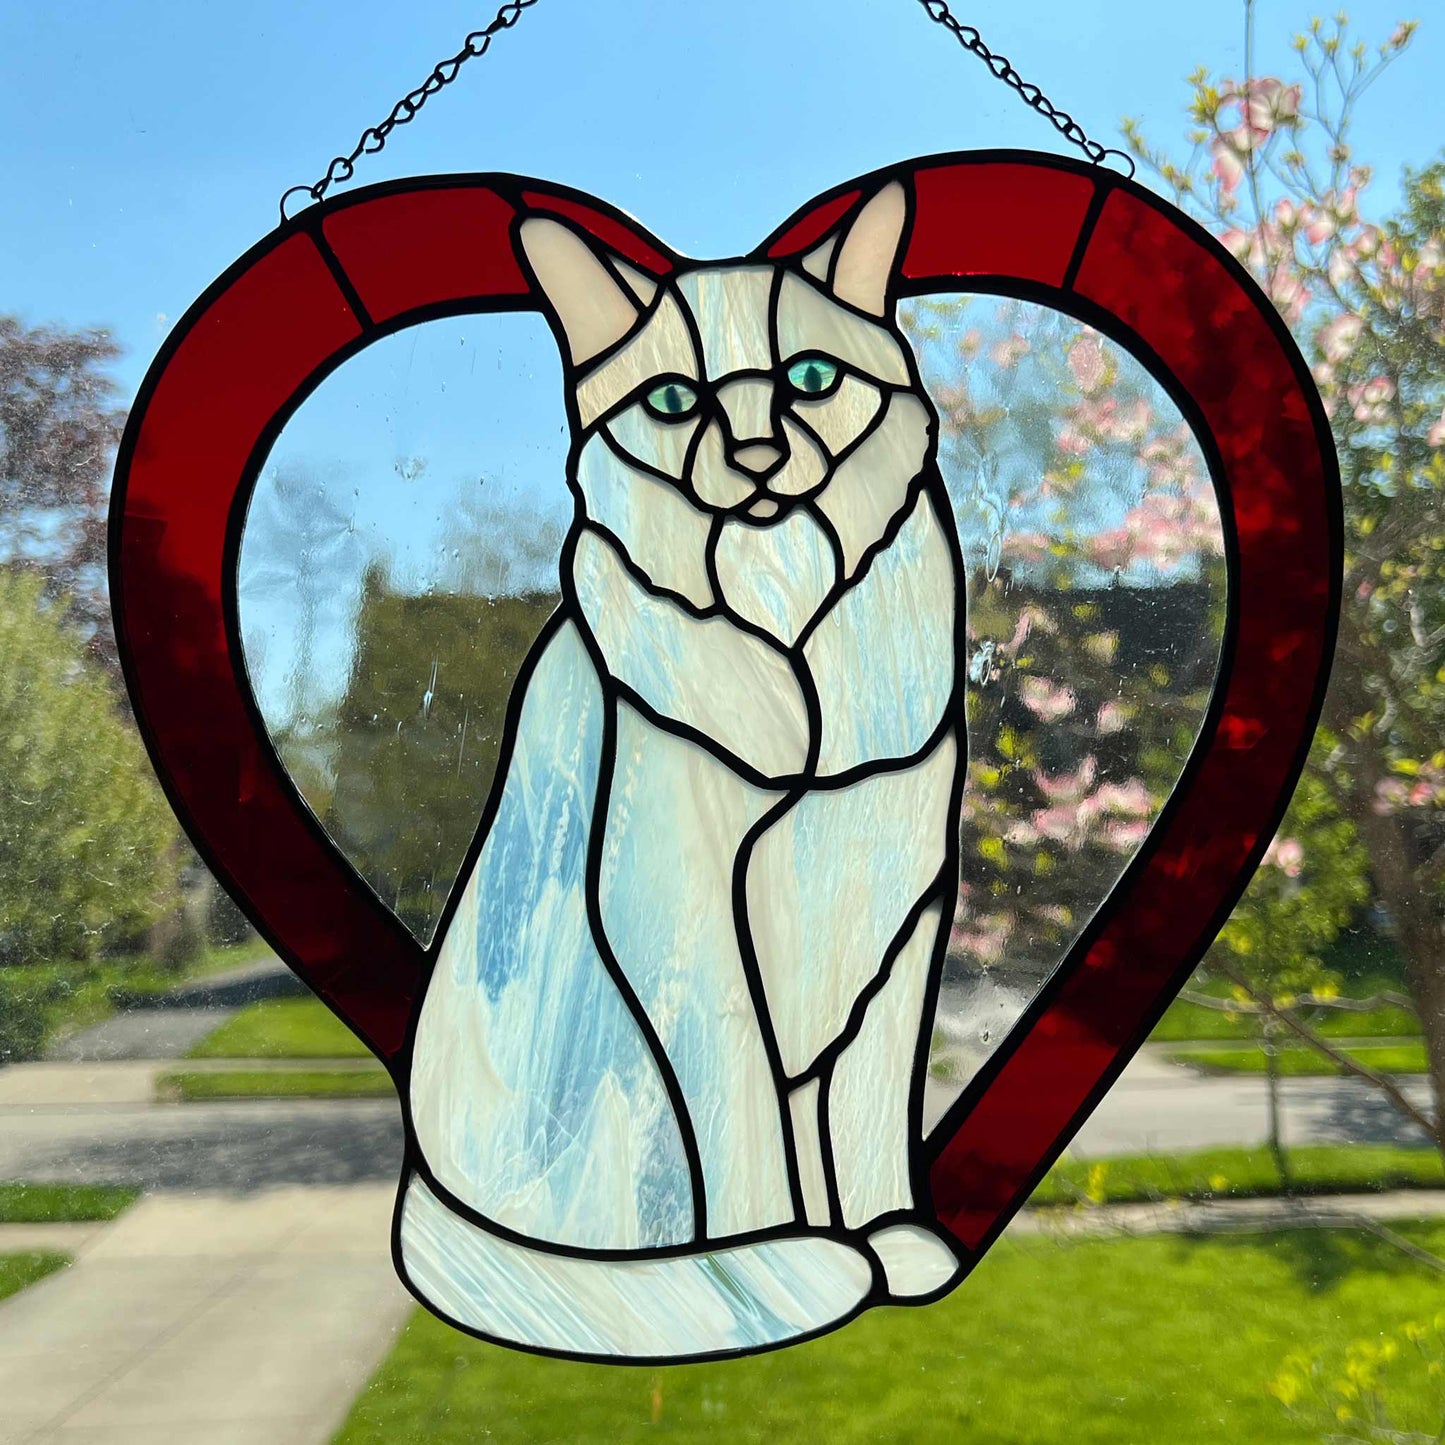 An all white stained glass sitting cat surrounded by a red heart. The glass used for the white fur is textured to resemble real fur and the eyes are an iridescent blue.  Light pink is used for the inner ear and the nose. A clear rainy glass is used between the cat and the heart for stability. This picture is the backside of the cat